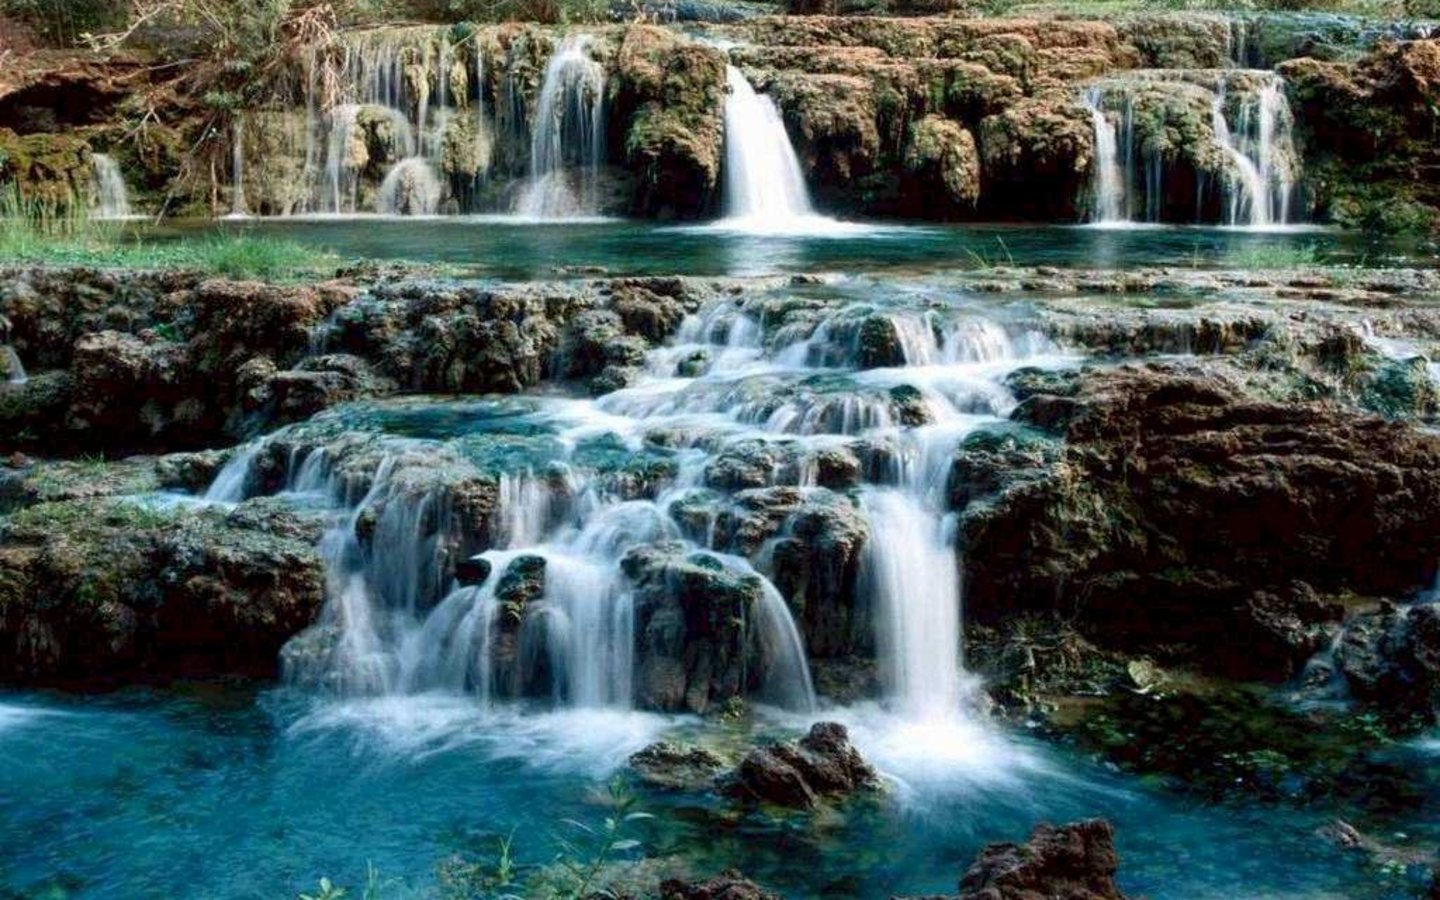 Live Wallpaper Of Waterfalls Which Is Under The Waterfall